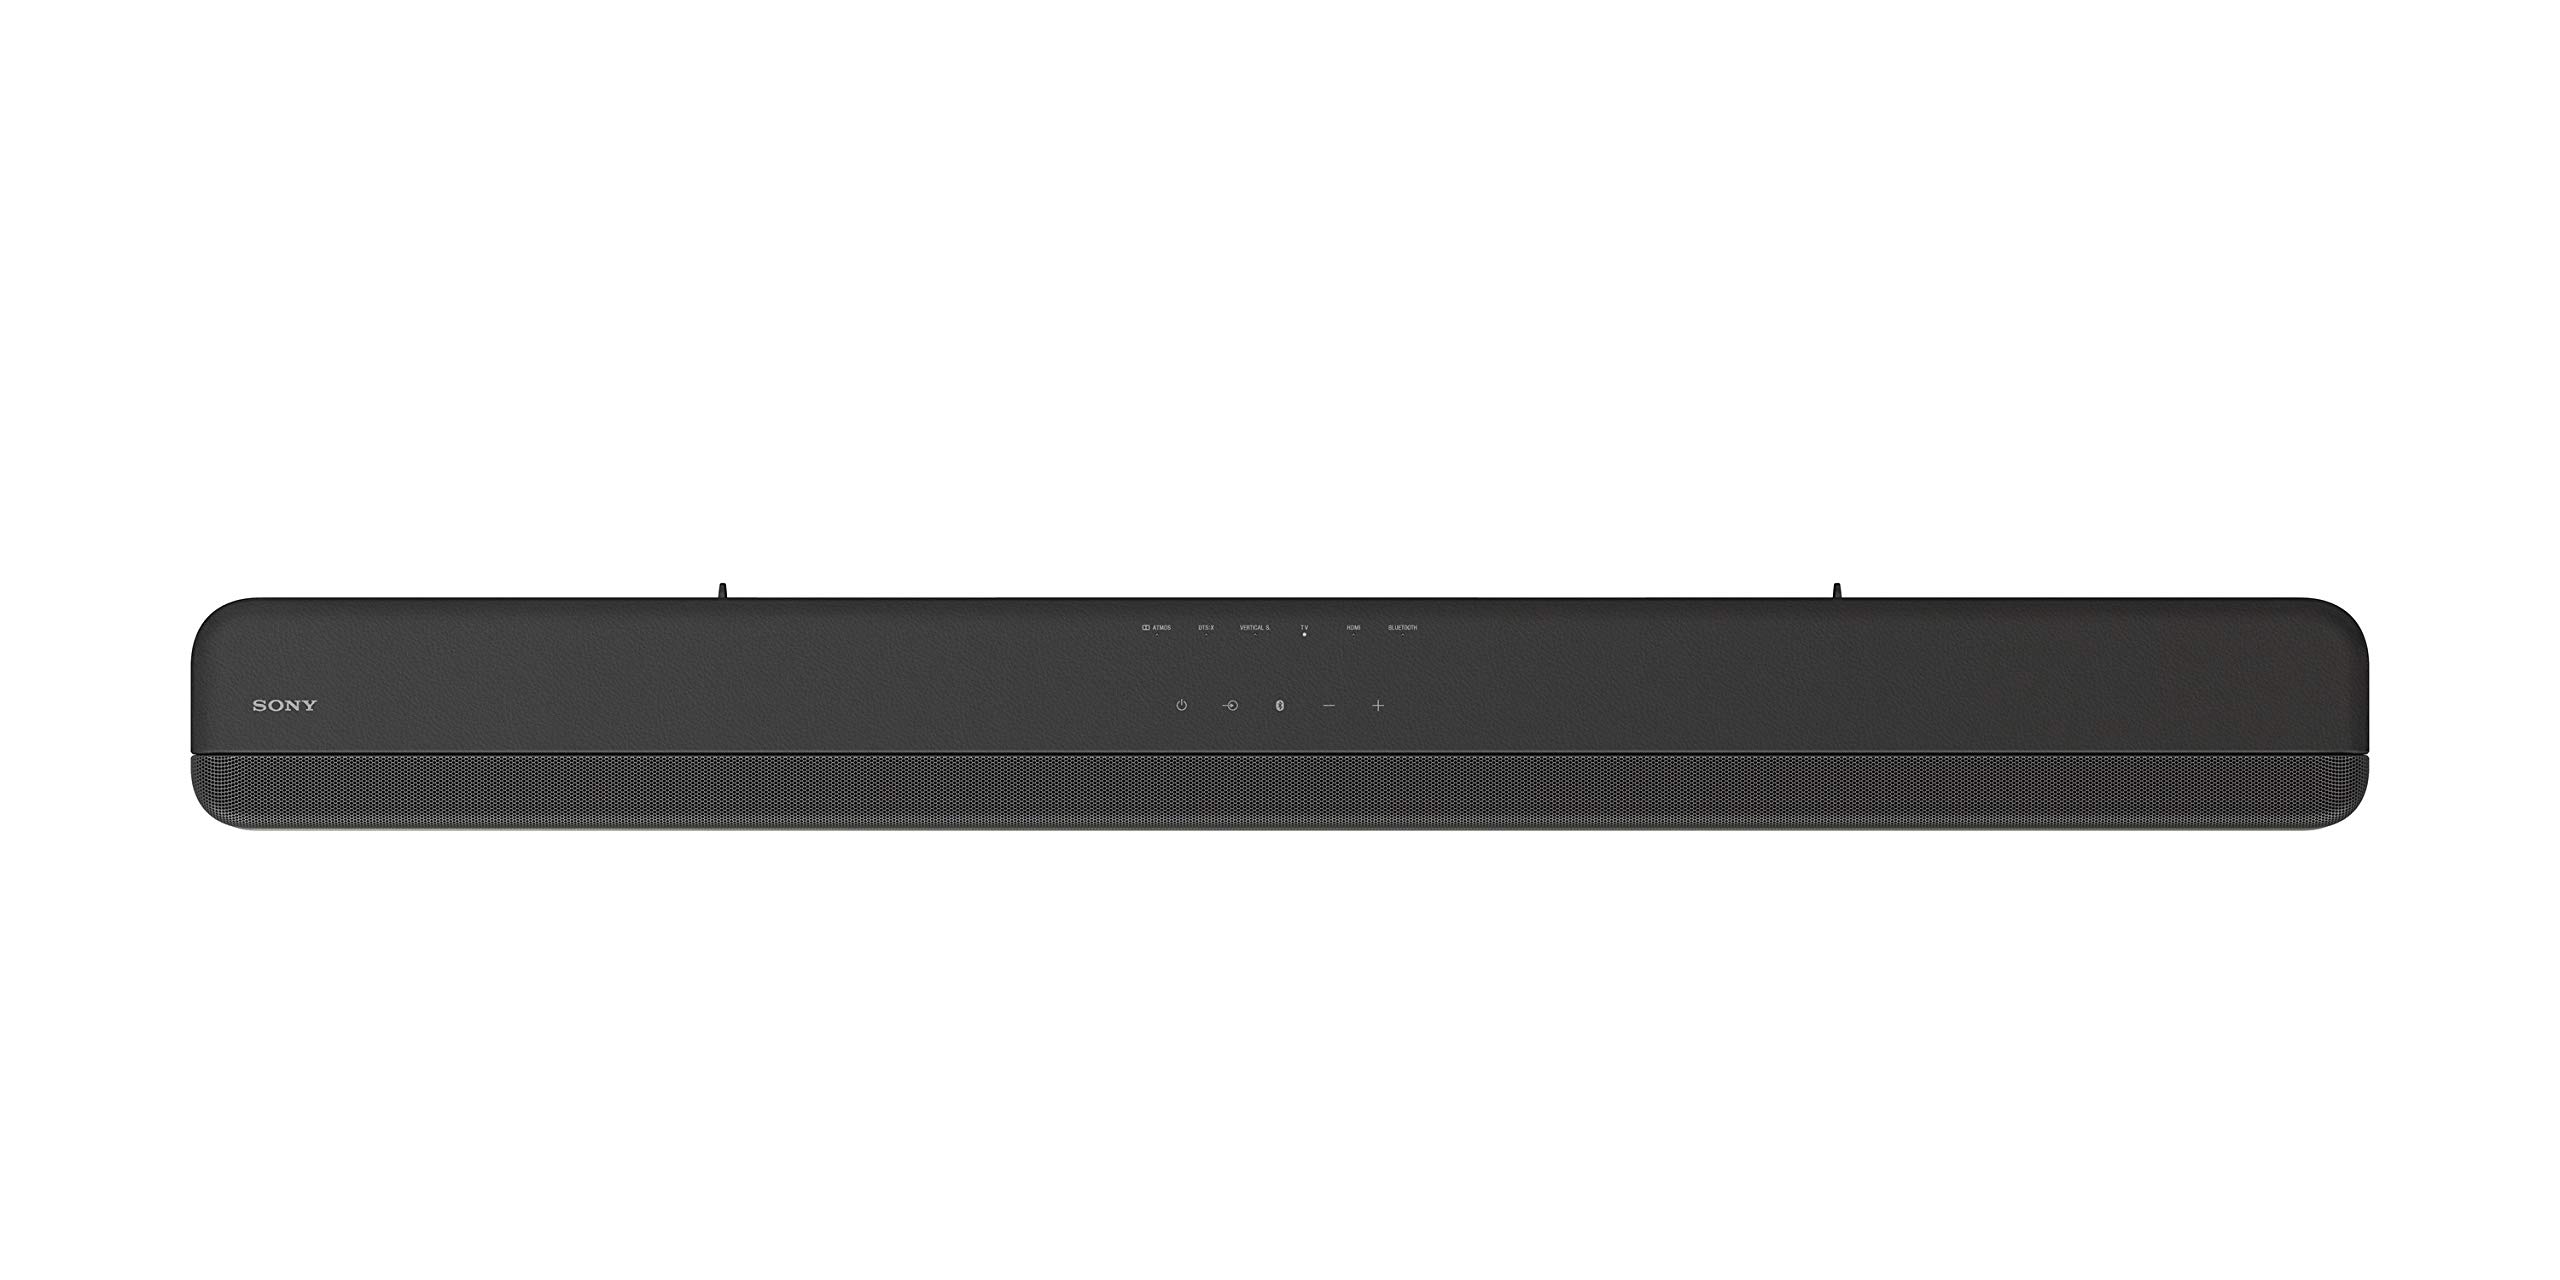 Sony HTX8500 2.1ch Dolby Atmos/DTS:X Soundbar with Built-in subwoofer, Black (Now open to all) $198